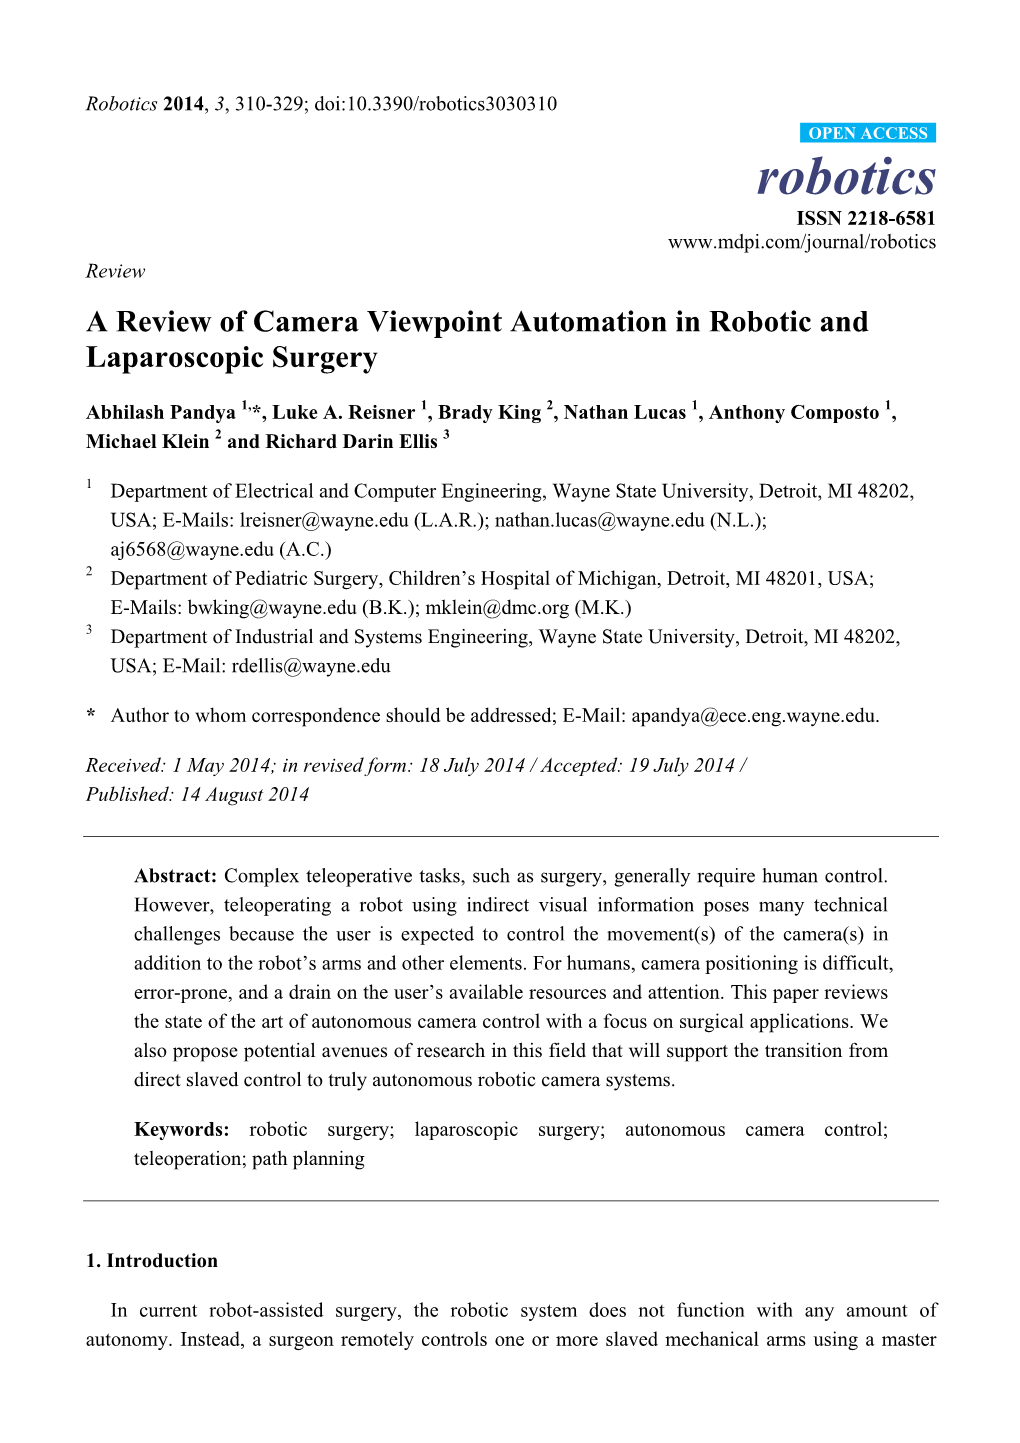 A Review of Camera Viewpoint Automation in Robotic and Laparoscopic Surgery